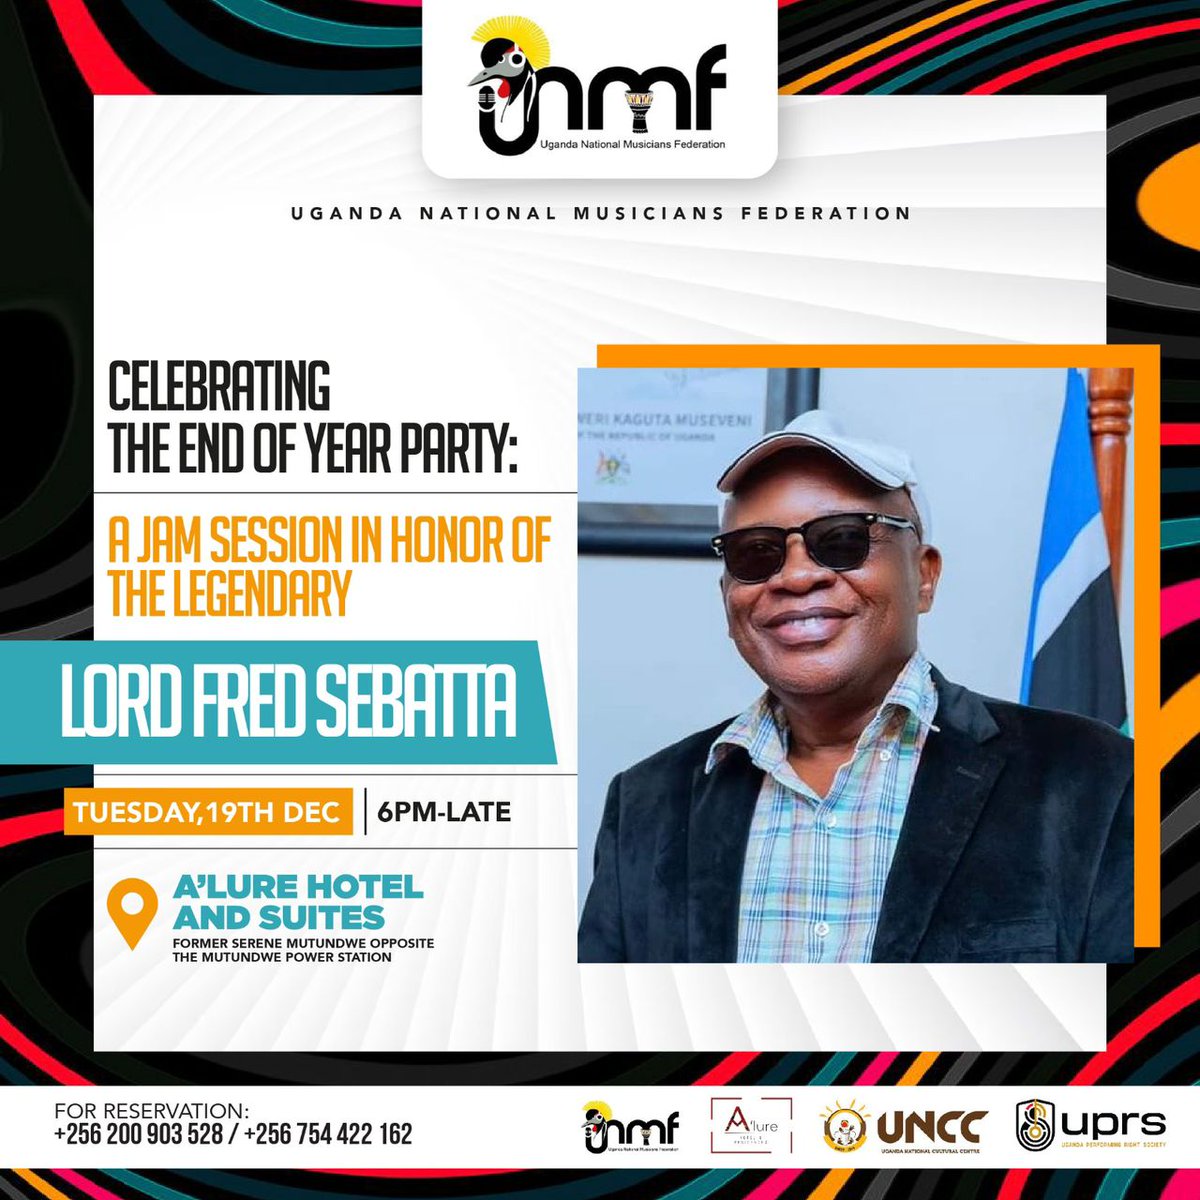 Celebrating the Iconic Jam Session end of year party: A Tribute to the Legend Lord Fred Sebatta As the end of the year approaches, the Ugandan music industry is gearing up for a memorable celebration in honor of the legendary Lord Fred Sebatta. The Uganda National Musicians…